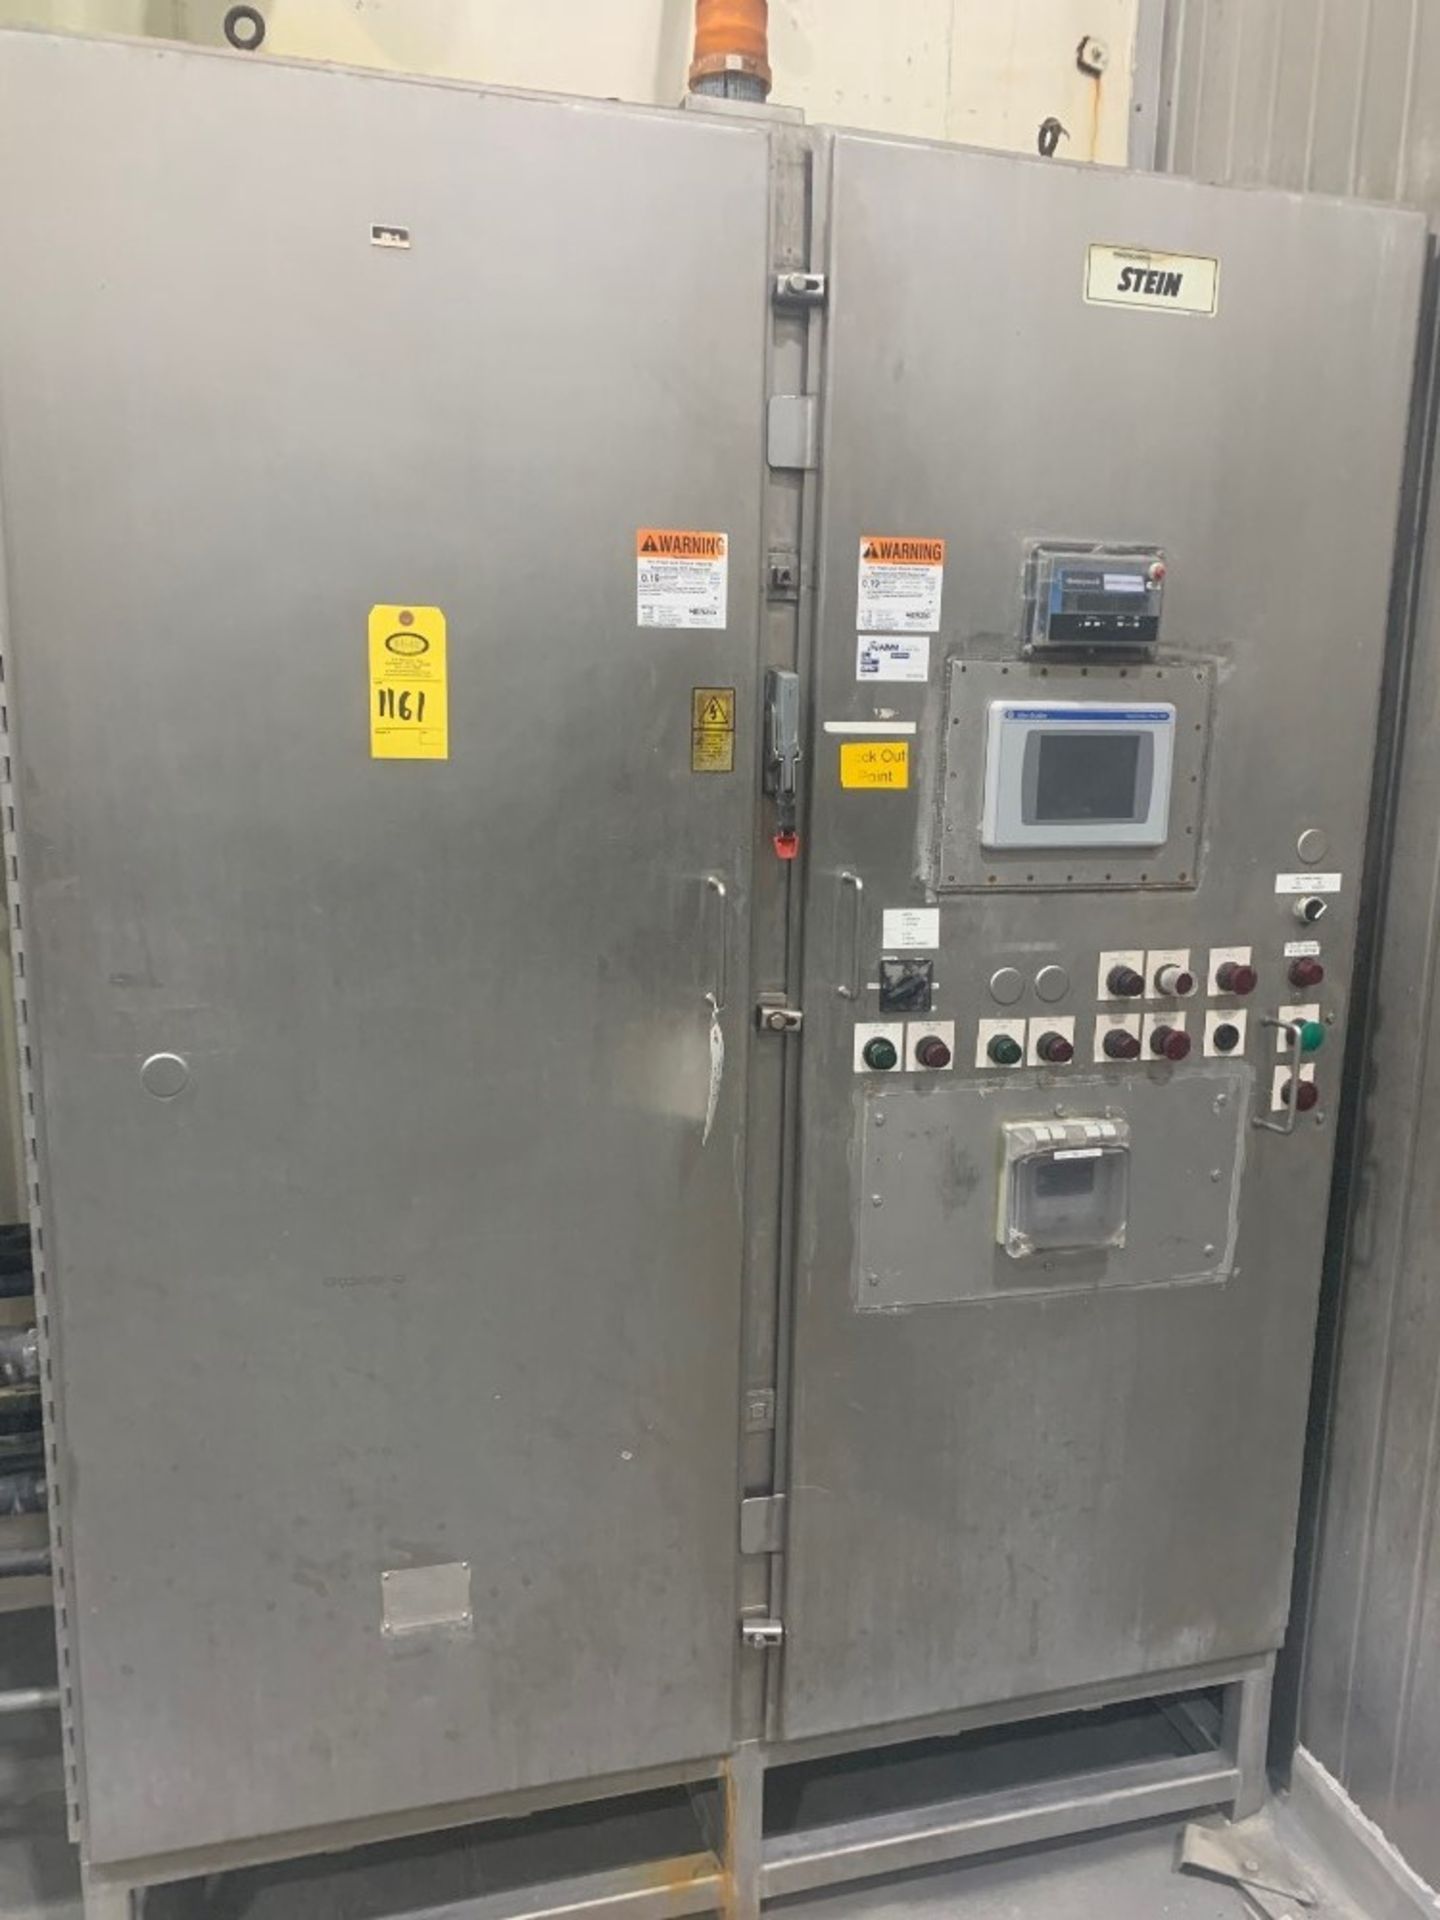 Stein Mdl. JSO Oven, steam and gas with air scrubber, 40" W belt X 20' L oven, (2) steam cabinets - Image 5 of 13